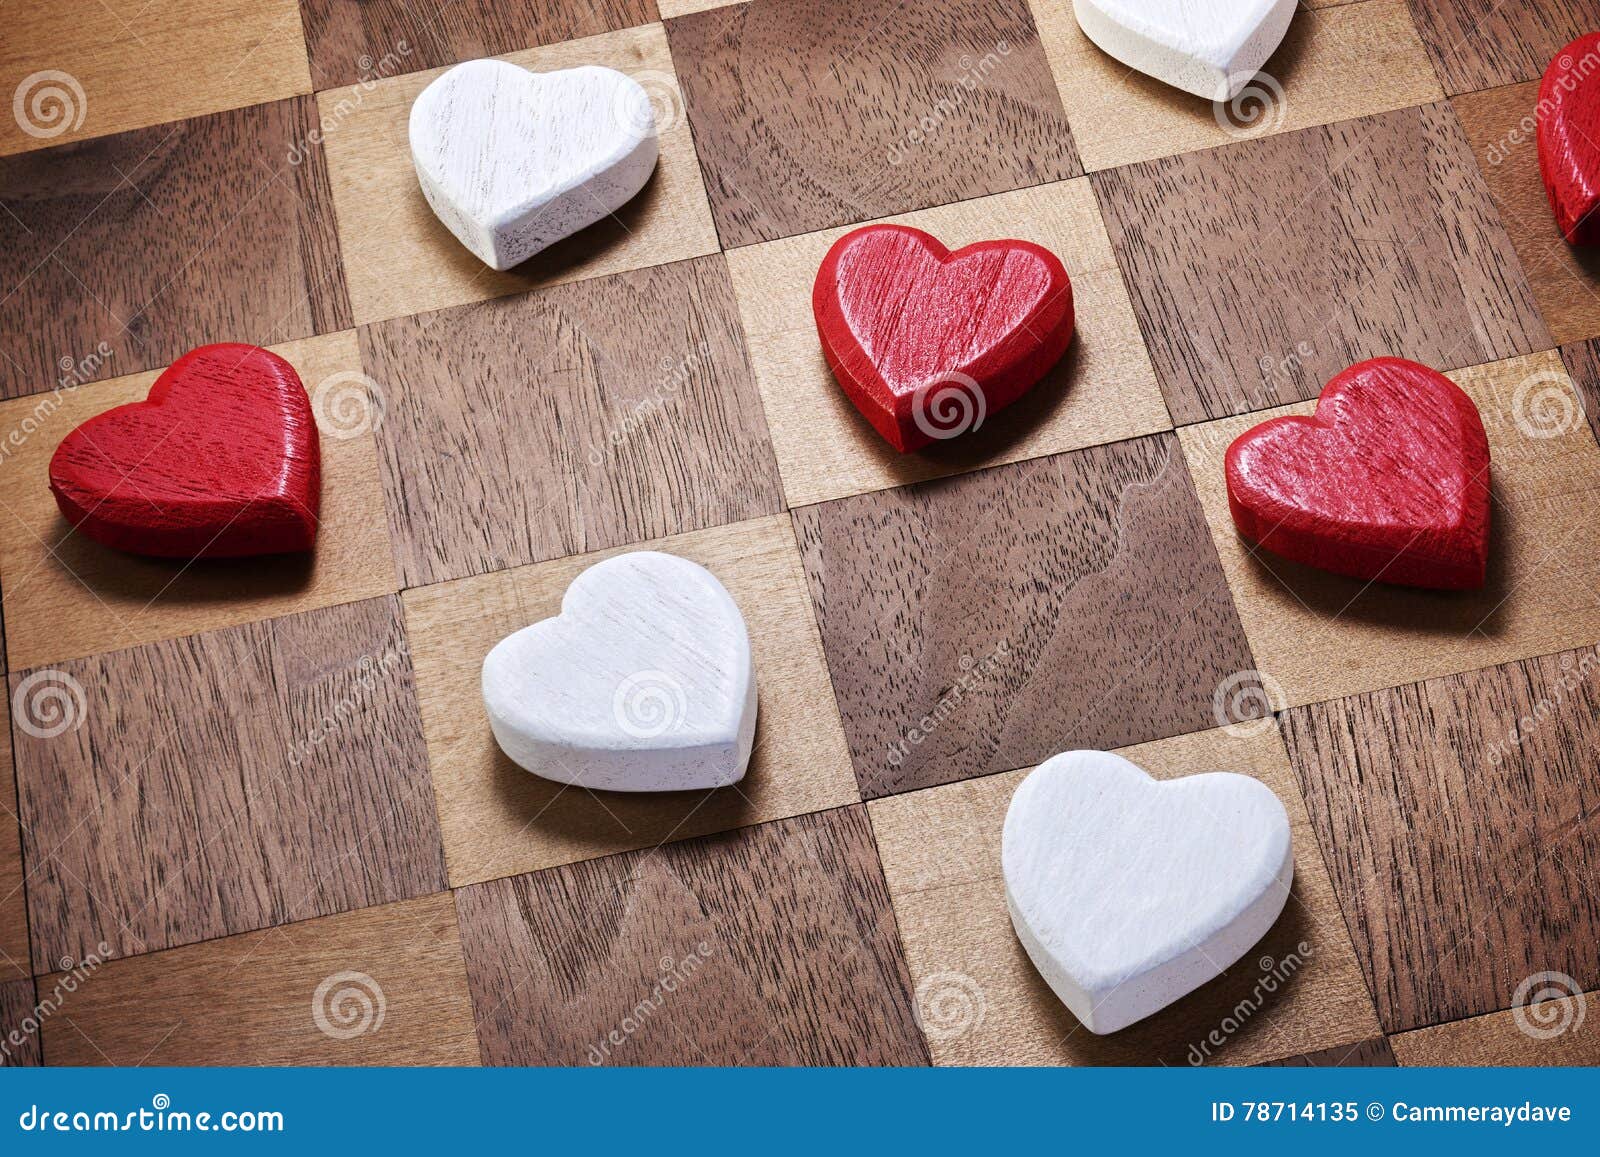 game love heart checkers